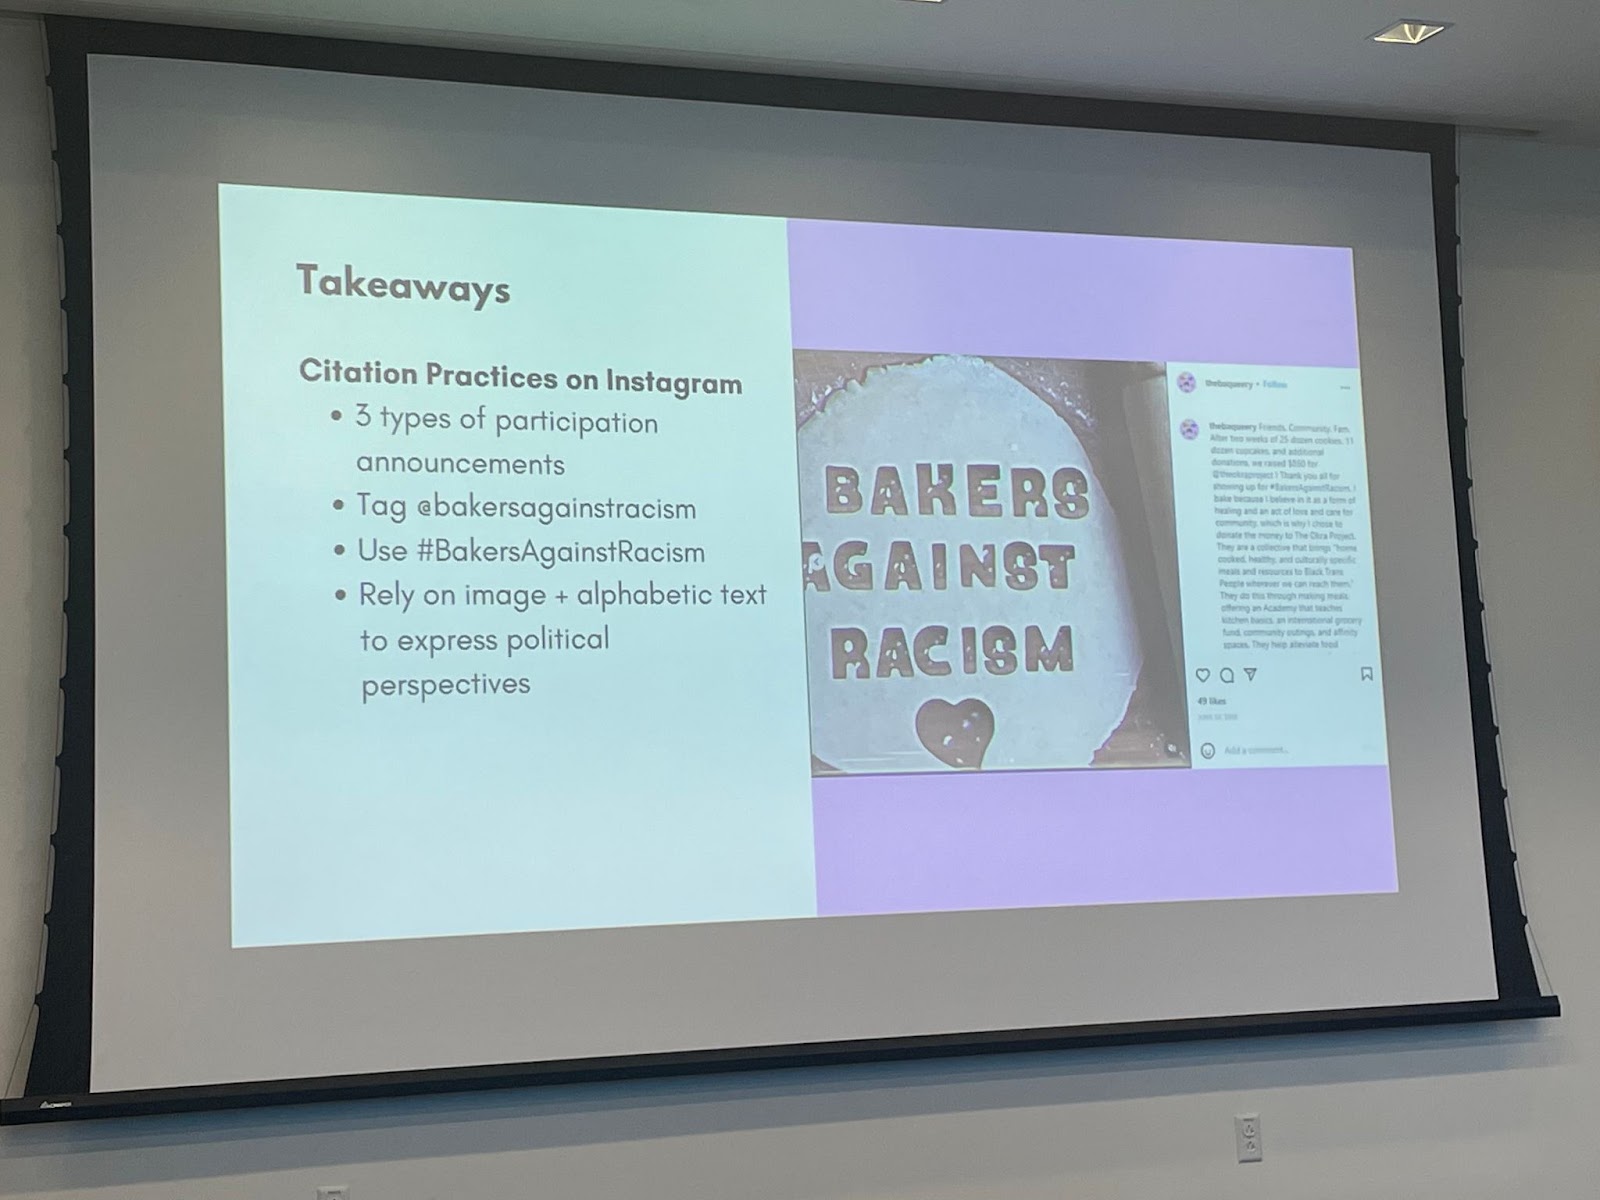 Beardsley’s slide shows Bakers Against Racism instagram post and summarizes citation practices used by the bakers.